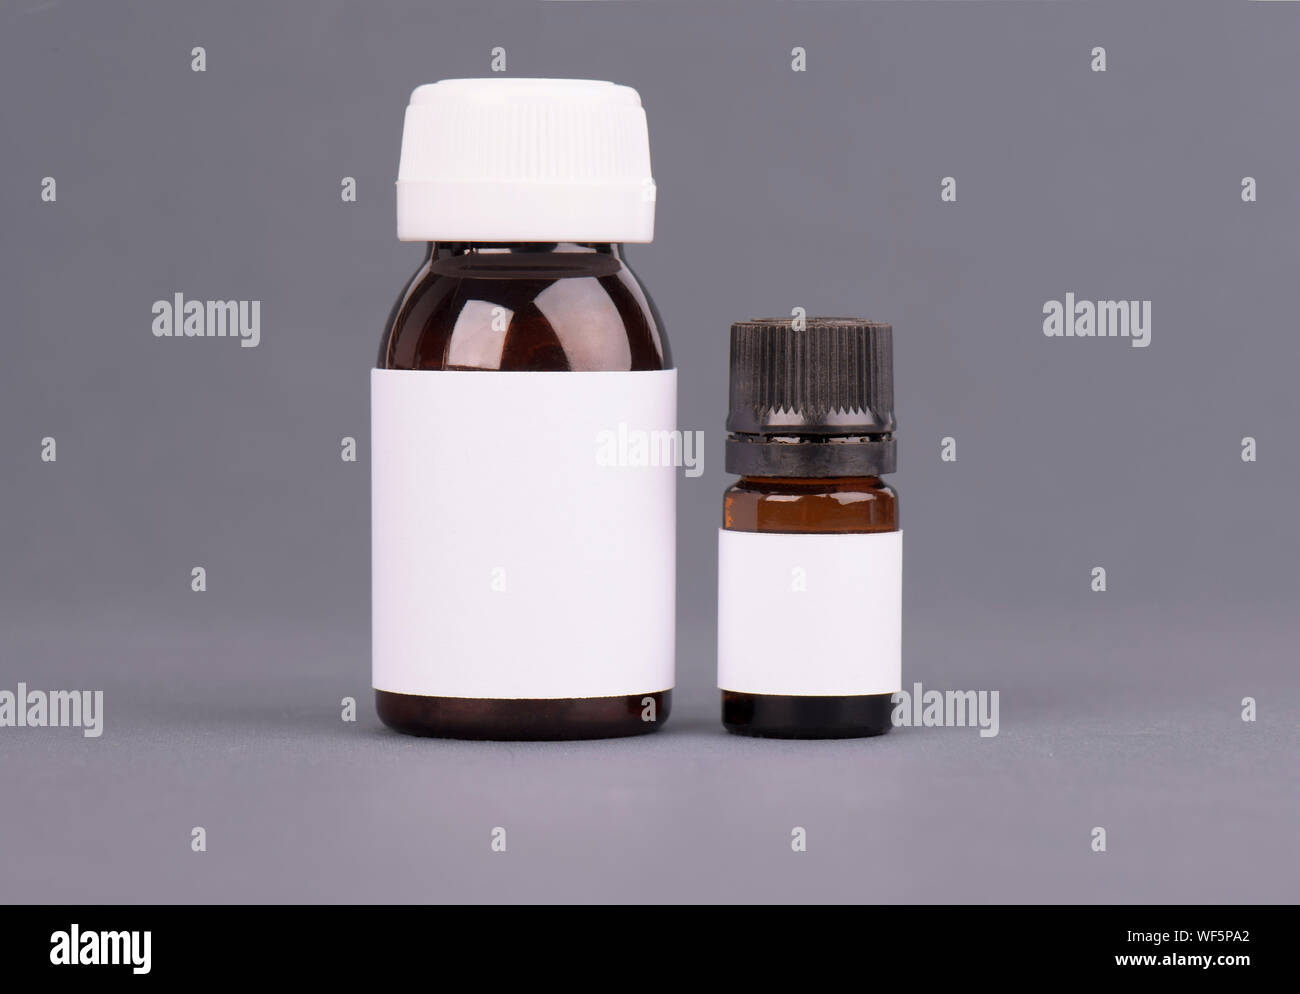 Blank big and medium size medicine white plastic packaging bottles for cosmetics, vitamins, pills or capsules. Packaging on gray background Stock Photo